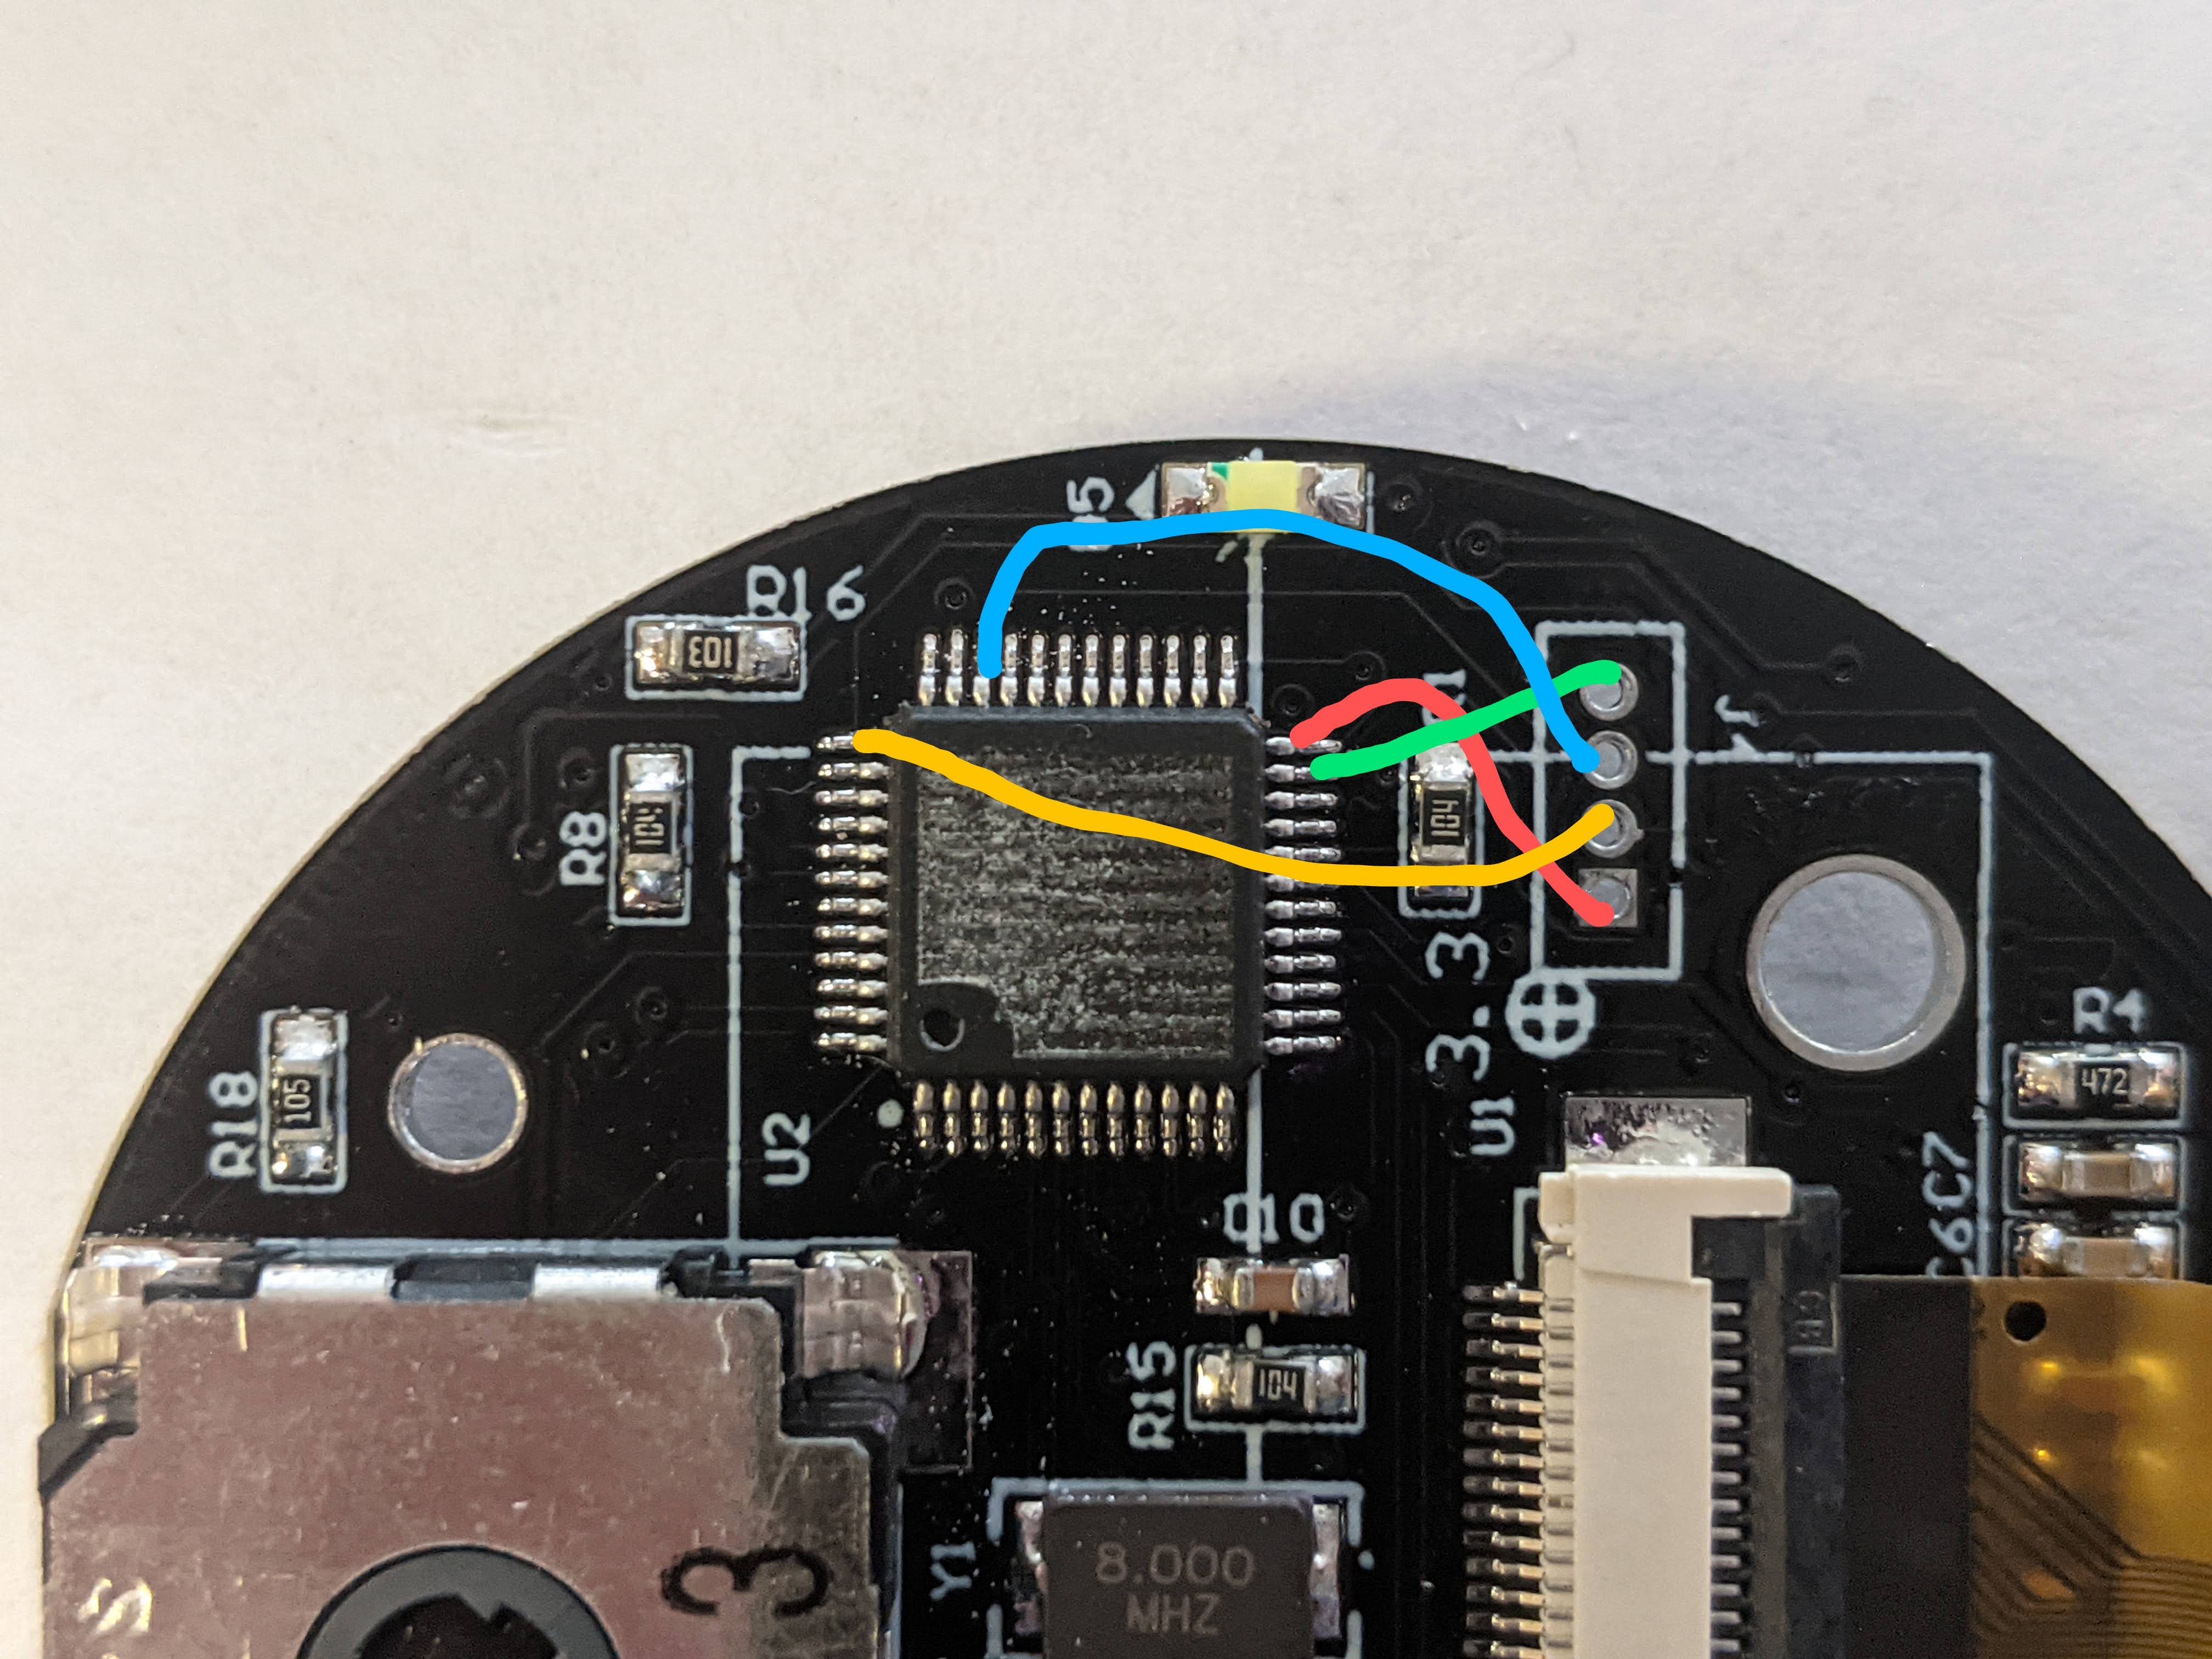 Image of the board with annotations showing the connection from each header to the MCU’s pins